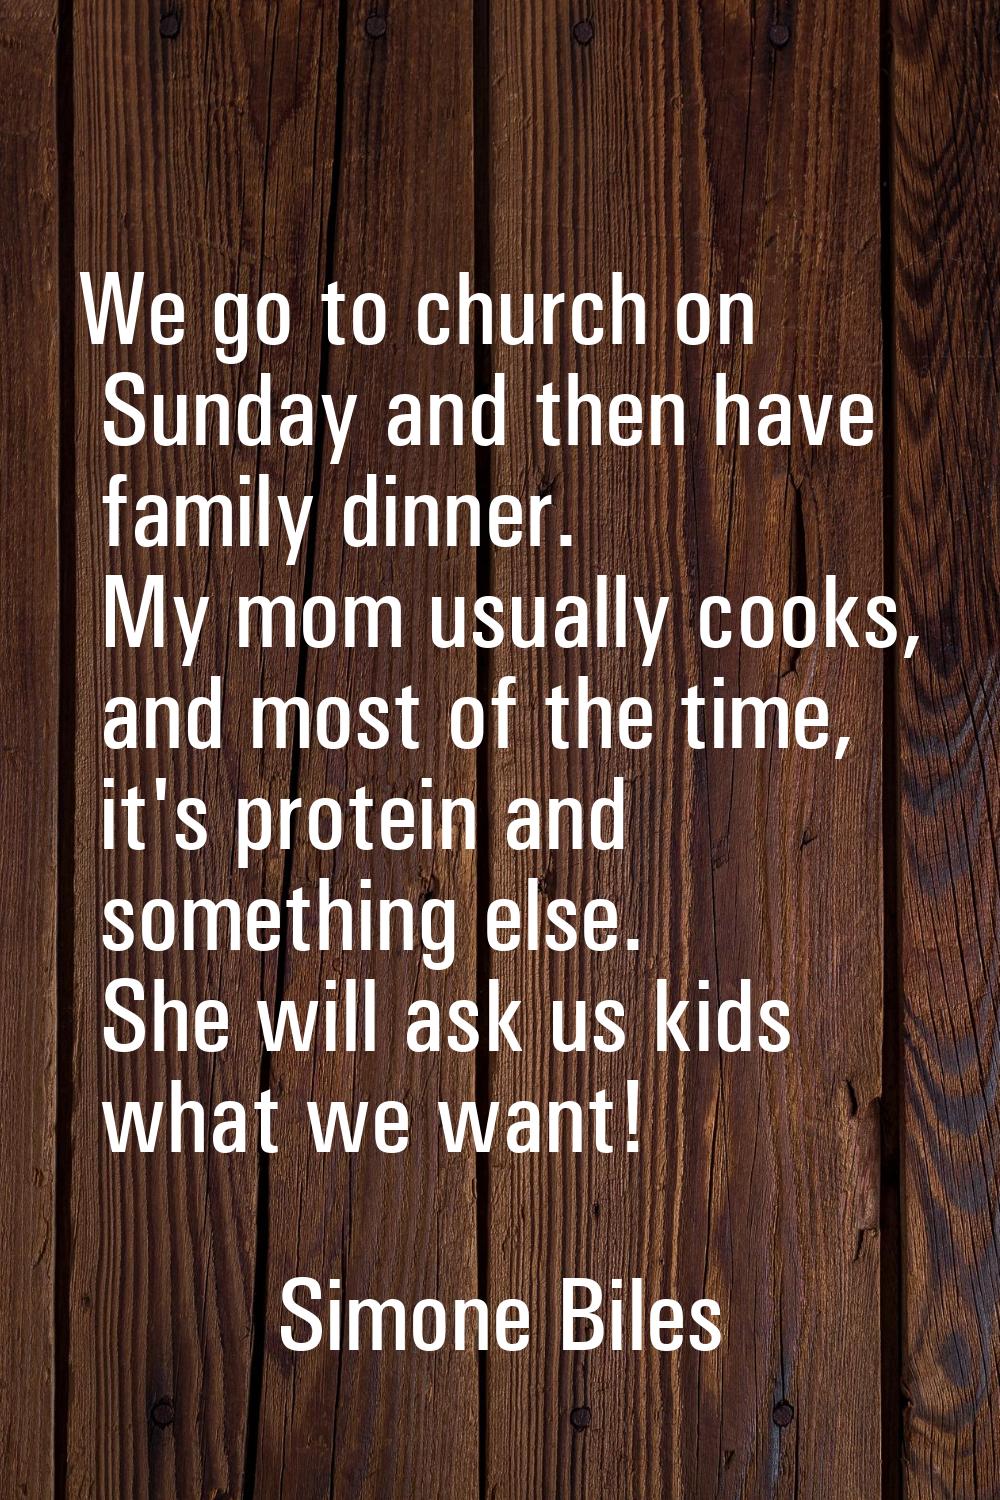 We go to church on Sunday and then have family dinner. My mom usually cooks, and most of the time, 